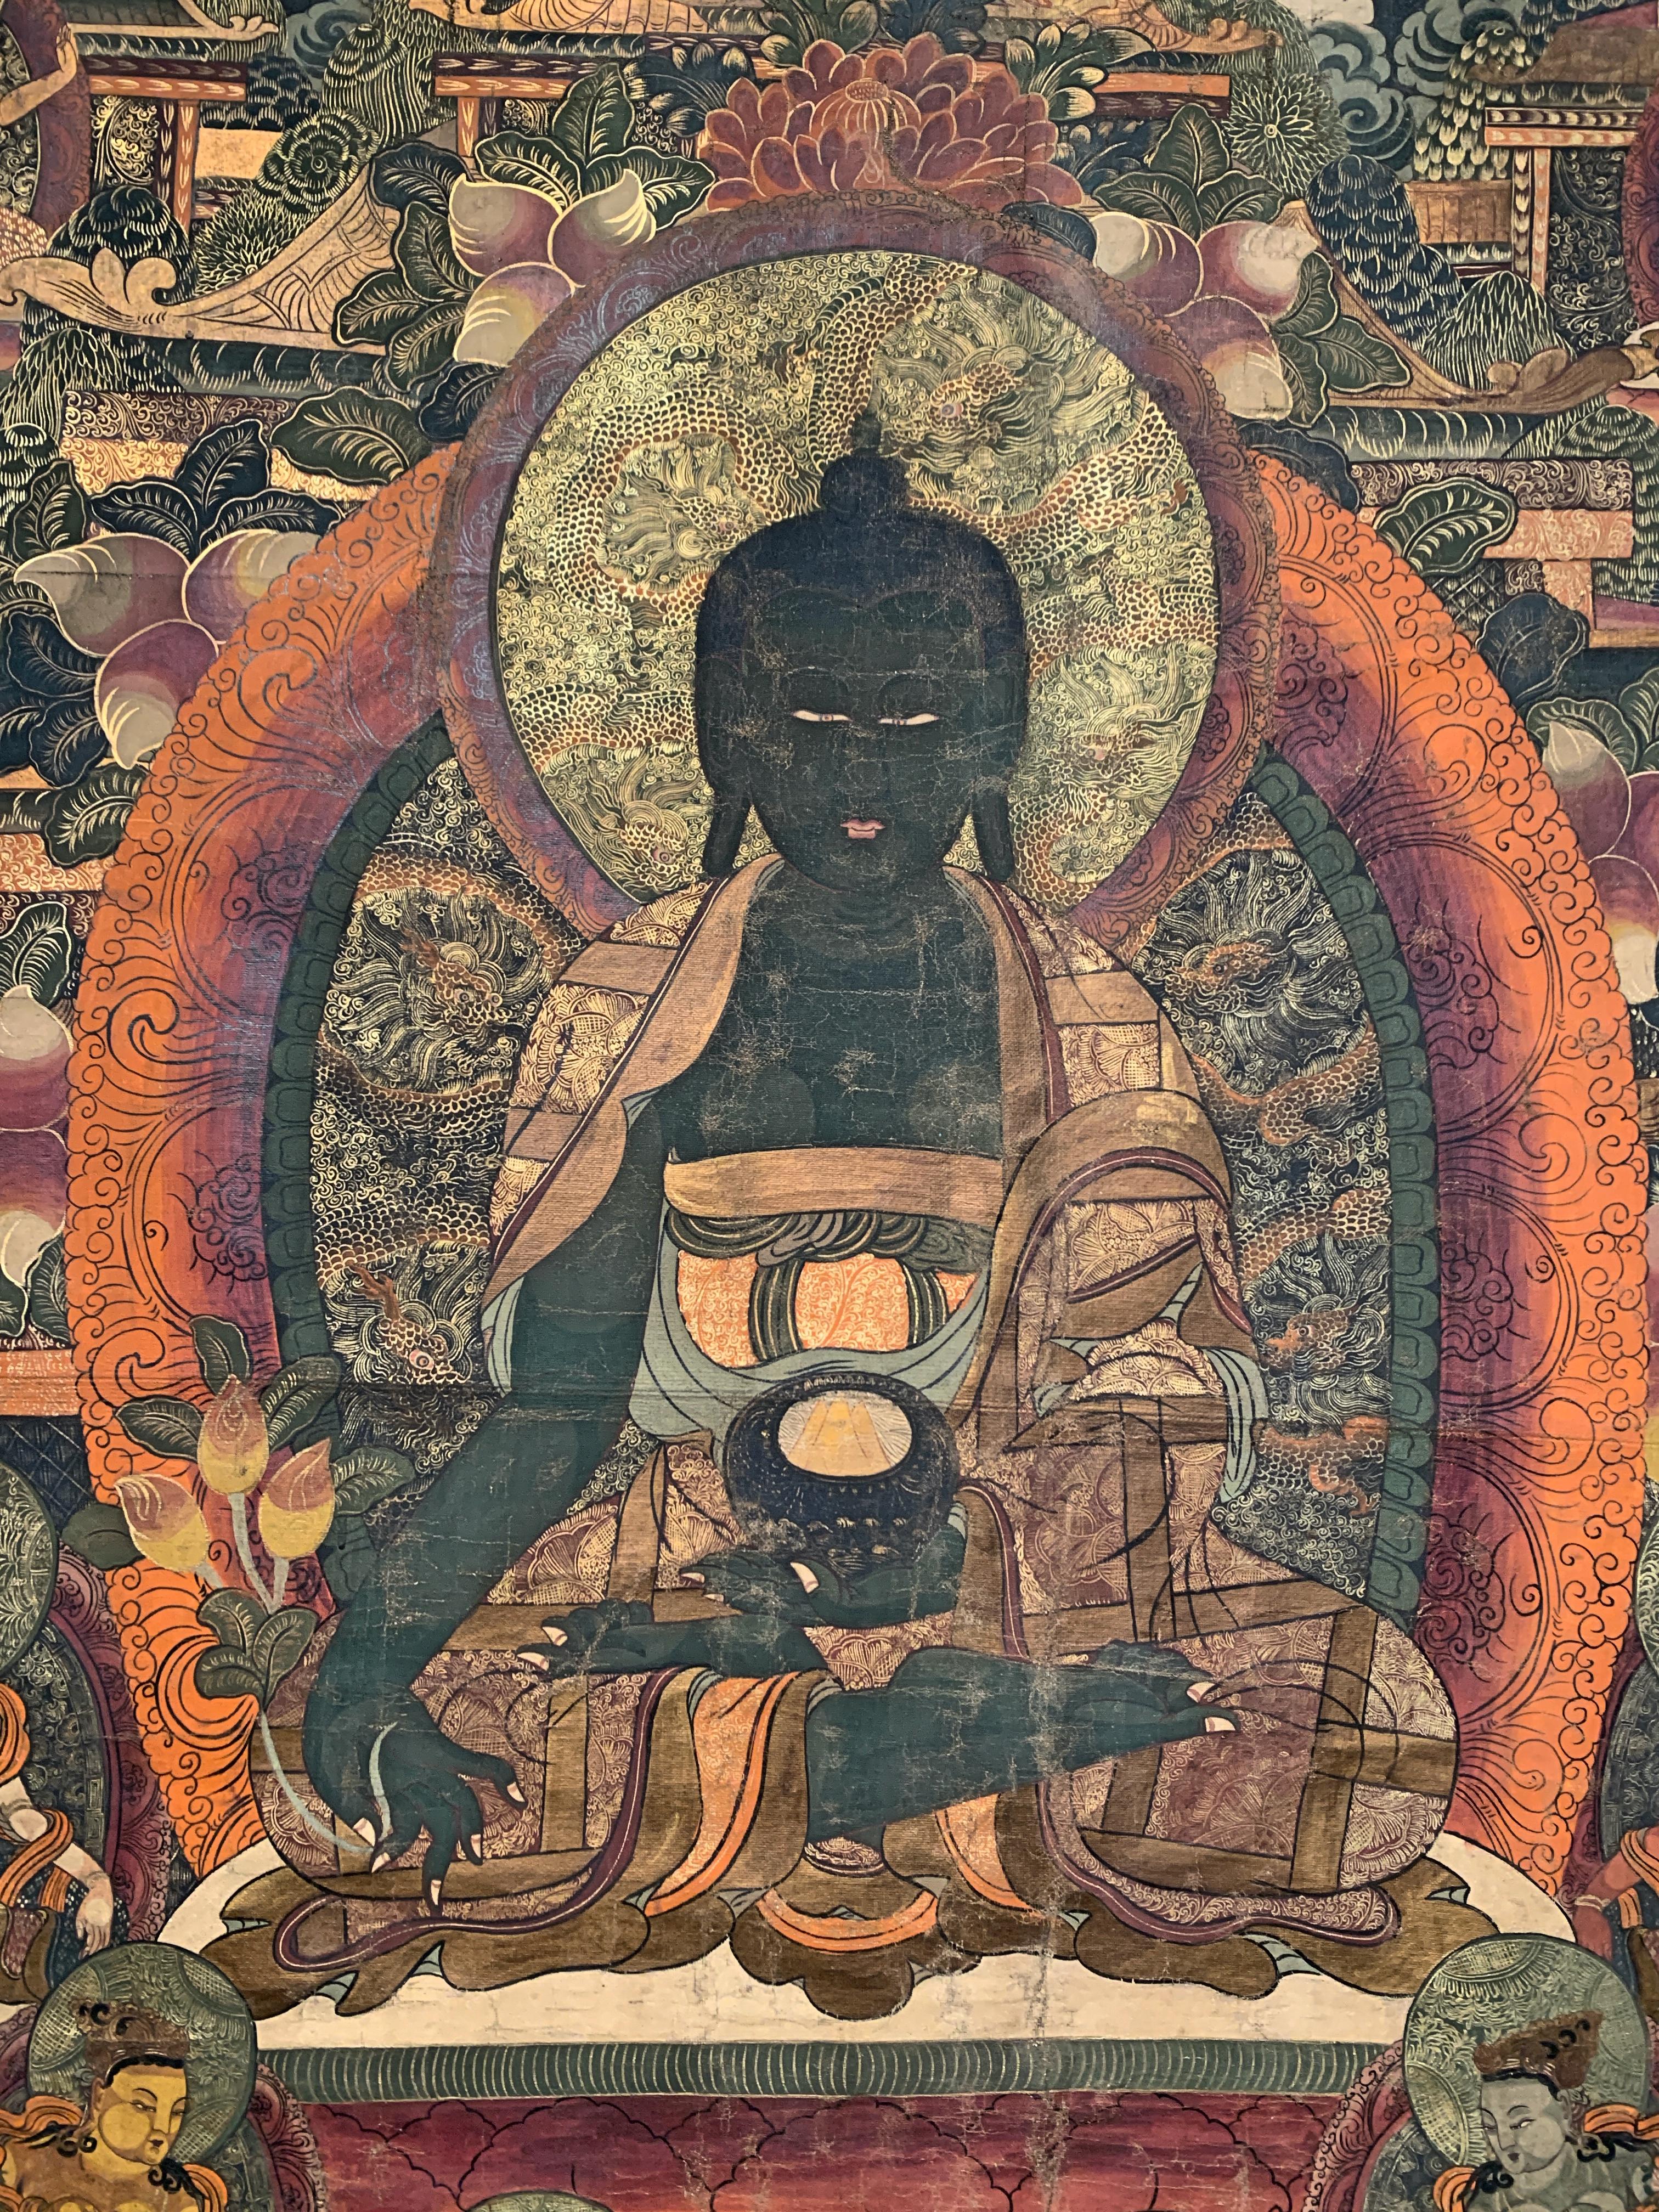 A large and finely painted Dharamshala school thangka of the Medicine Buddha, Bhaisajyaguru, mid-20th century, India.

Bhaisajyaguru, the Medicine Buddha, is the Buddha of medicine and healing. He is called and meditated upon to alleviate both